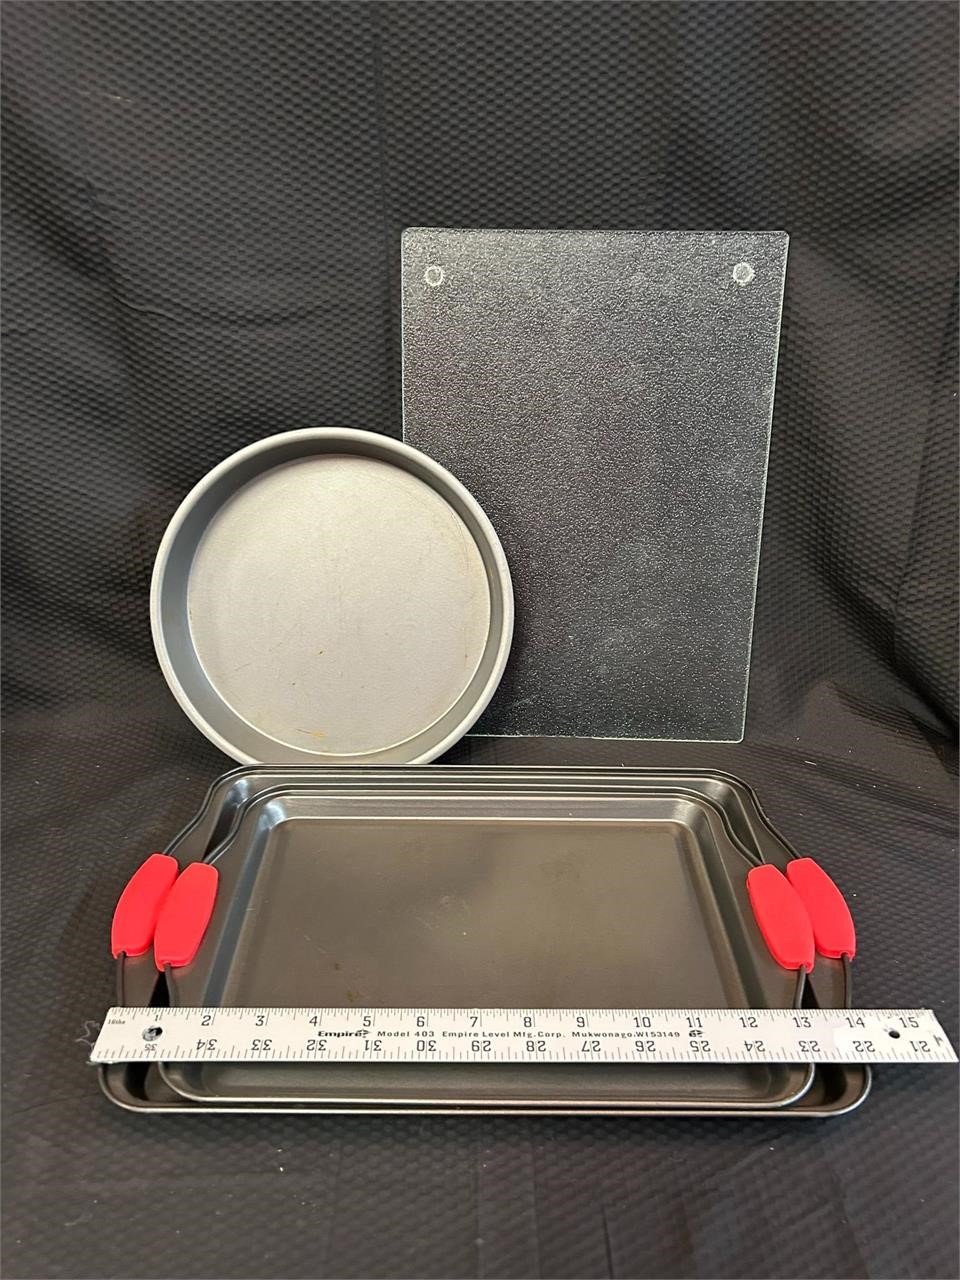 Lot of Baking Pans and Cutting Board